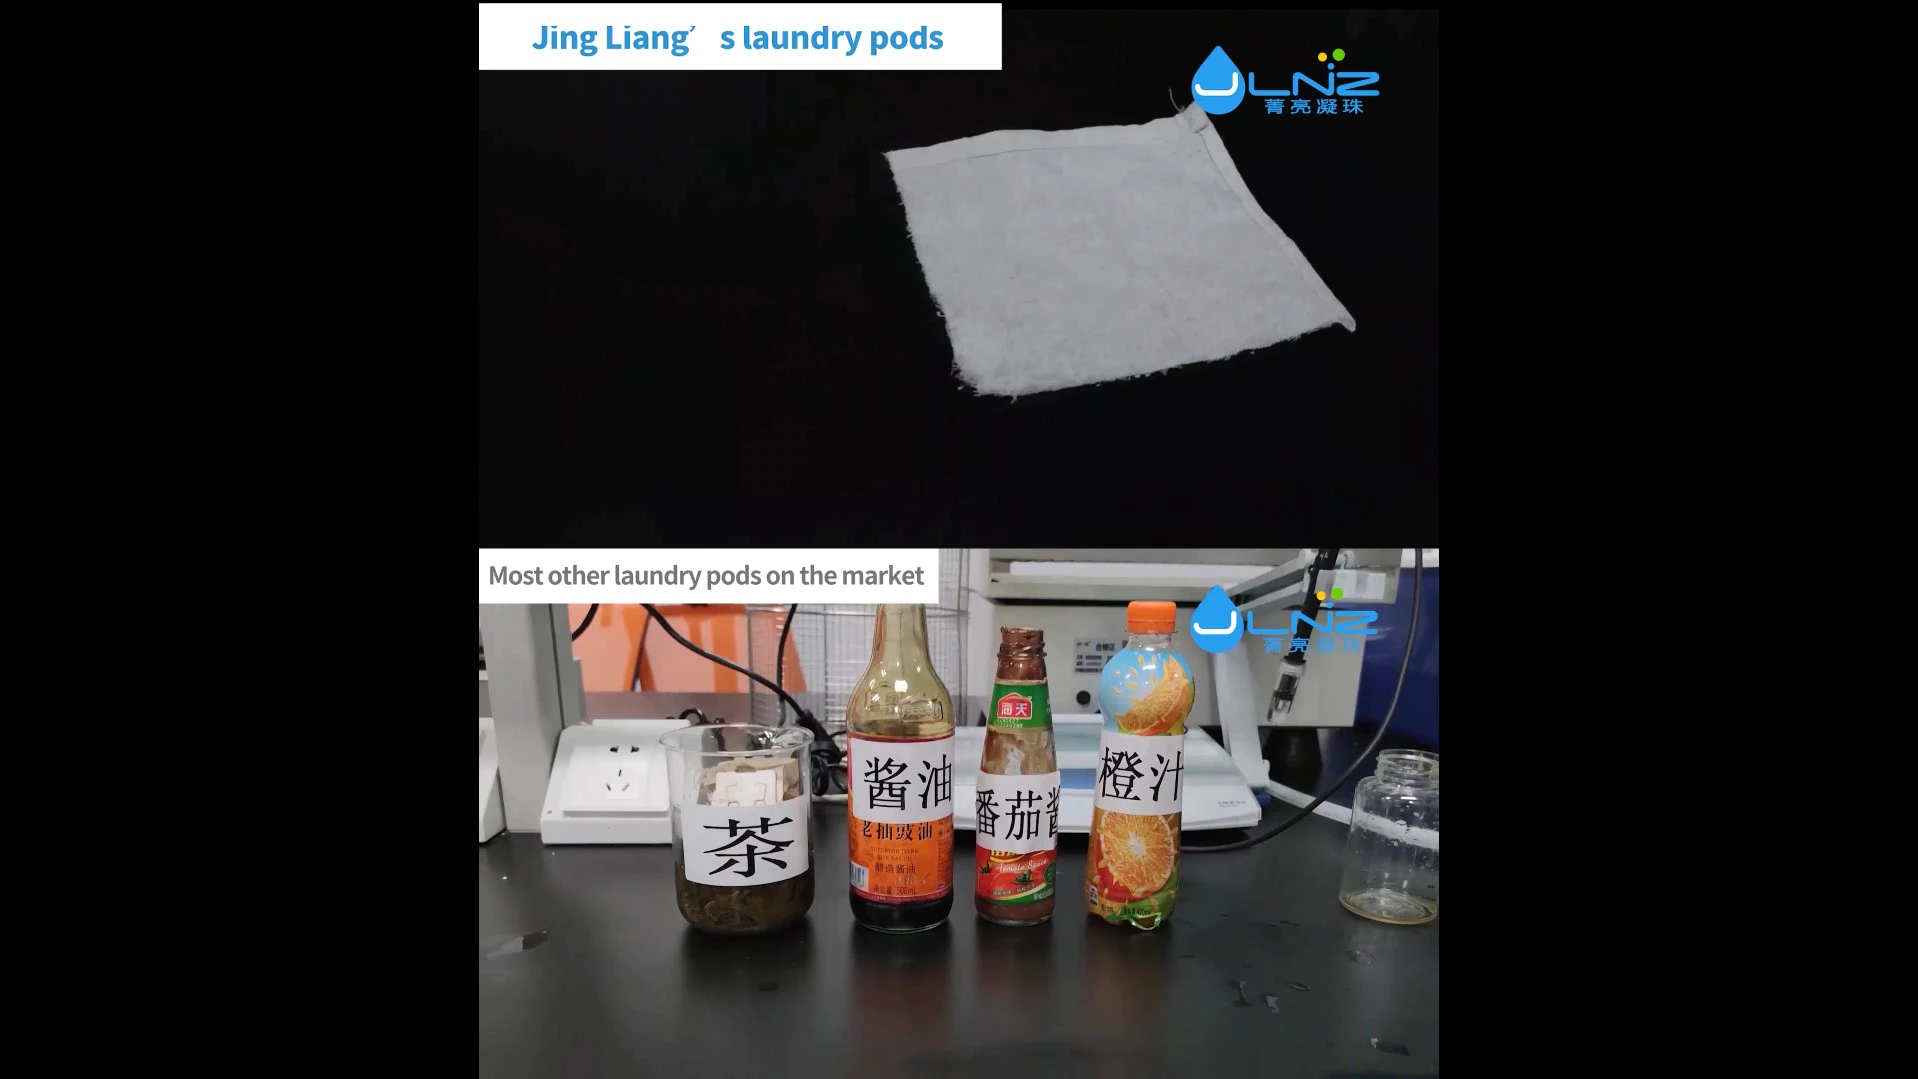 Compare the cleaning effect of JINGLIANG laundry pods and other common pods on the market.